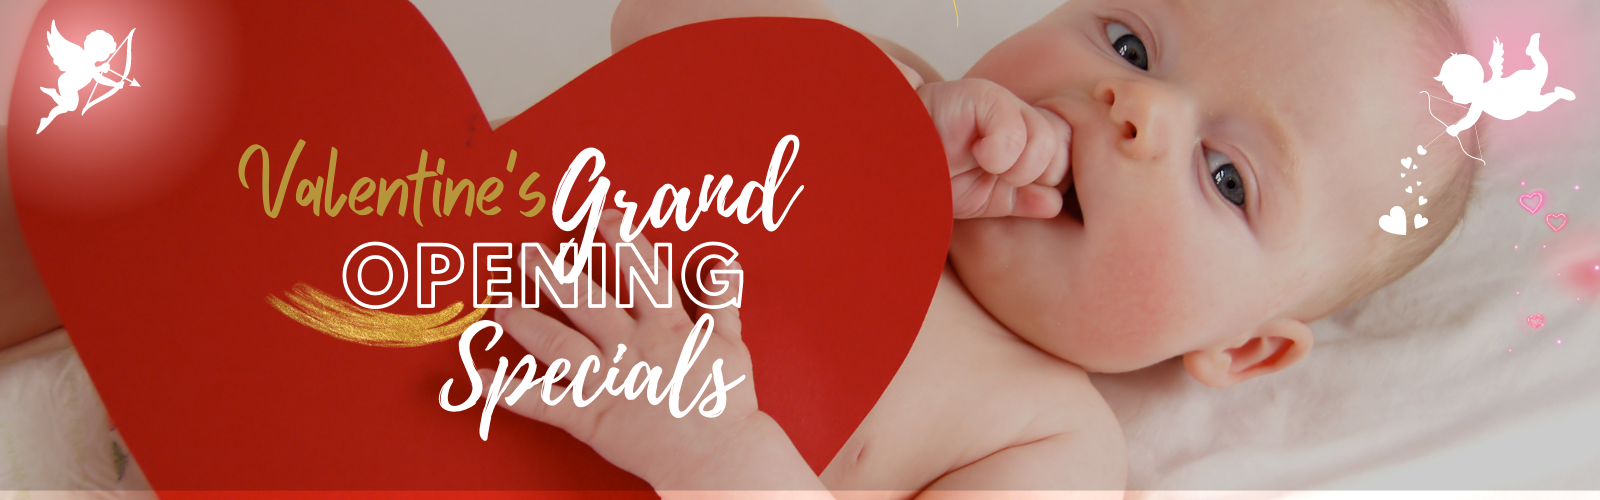 Fetal Photos by Cara is Sharing the Grand Opening Love and Five Ways to Bond with Your Baby While  I